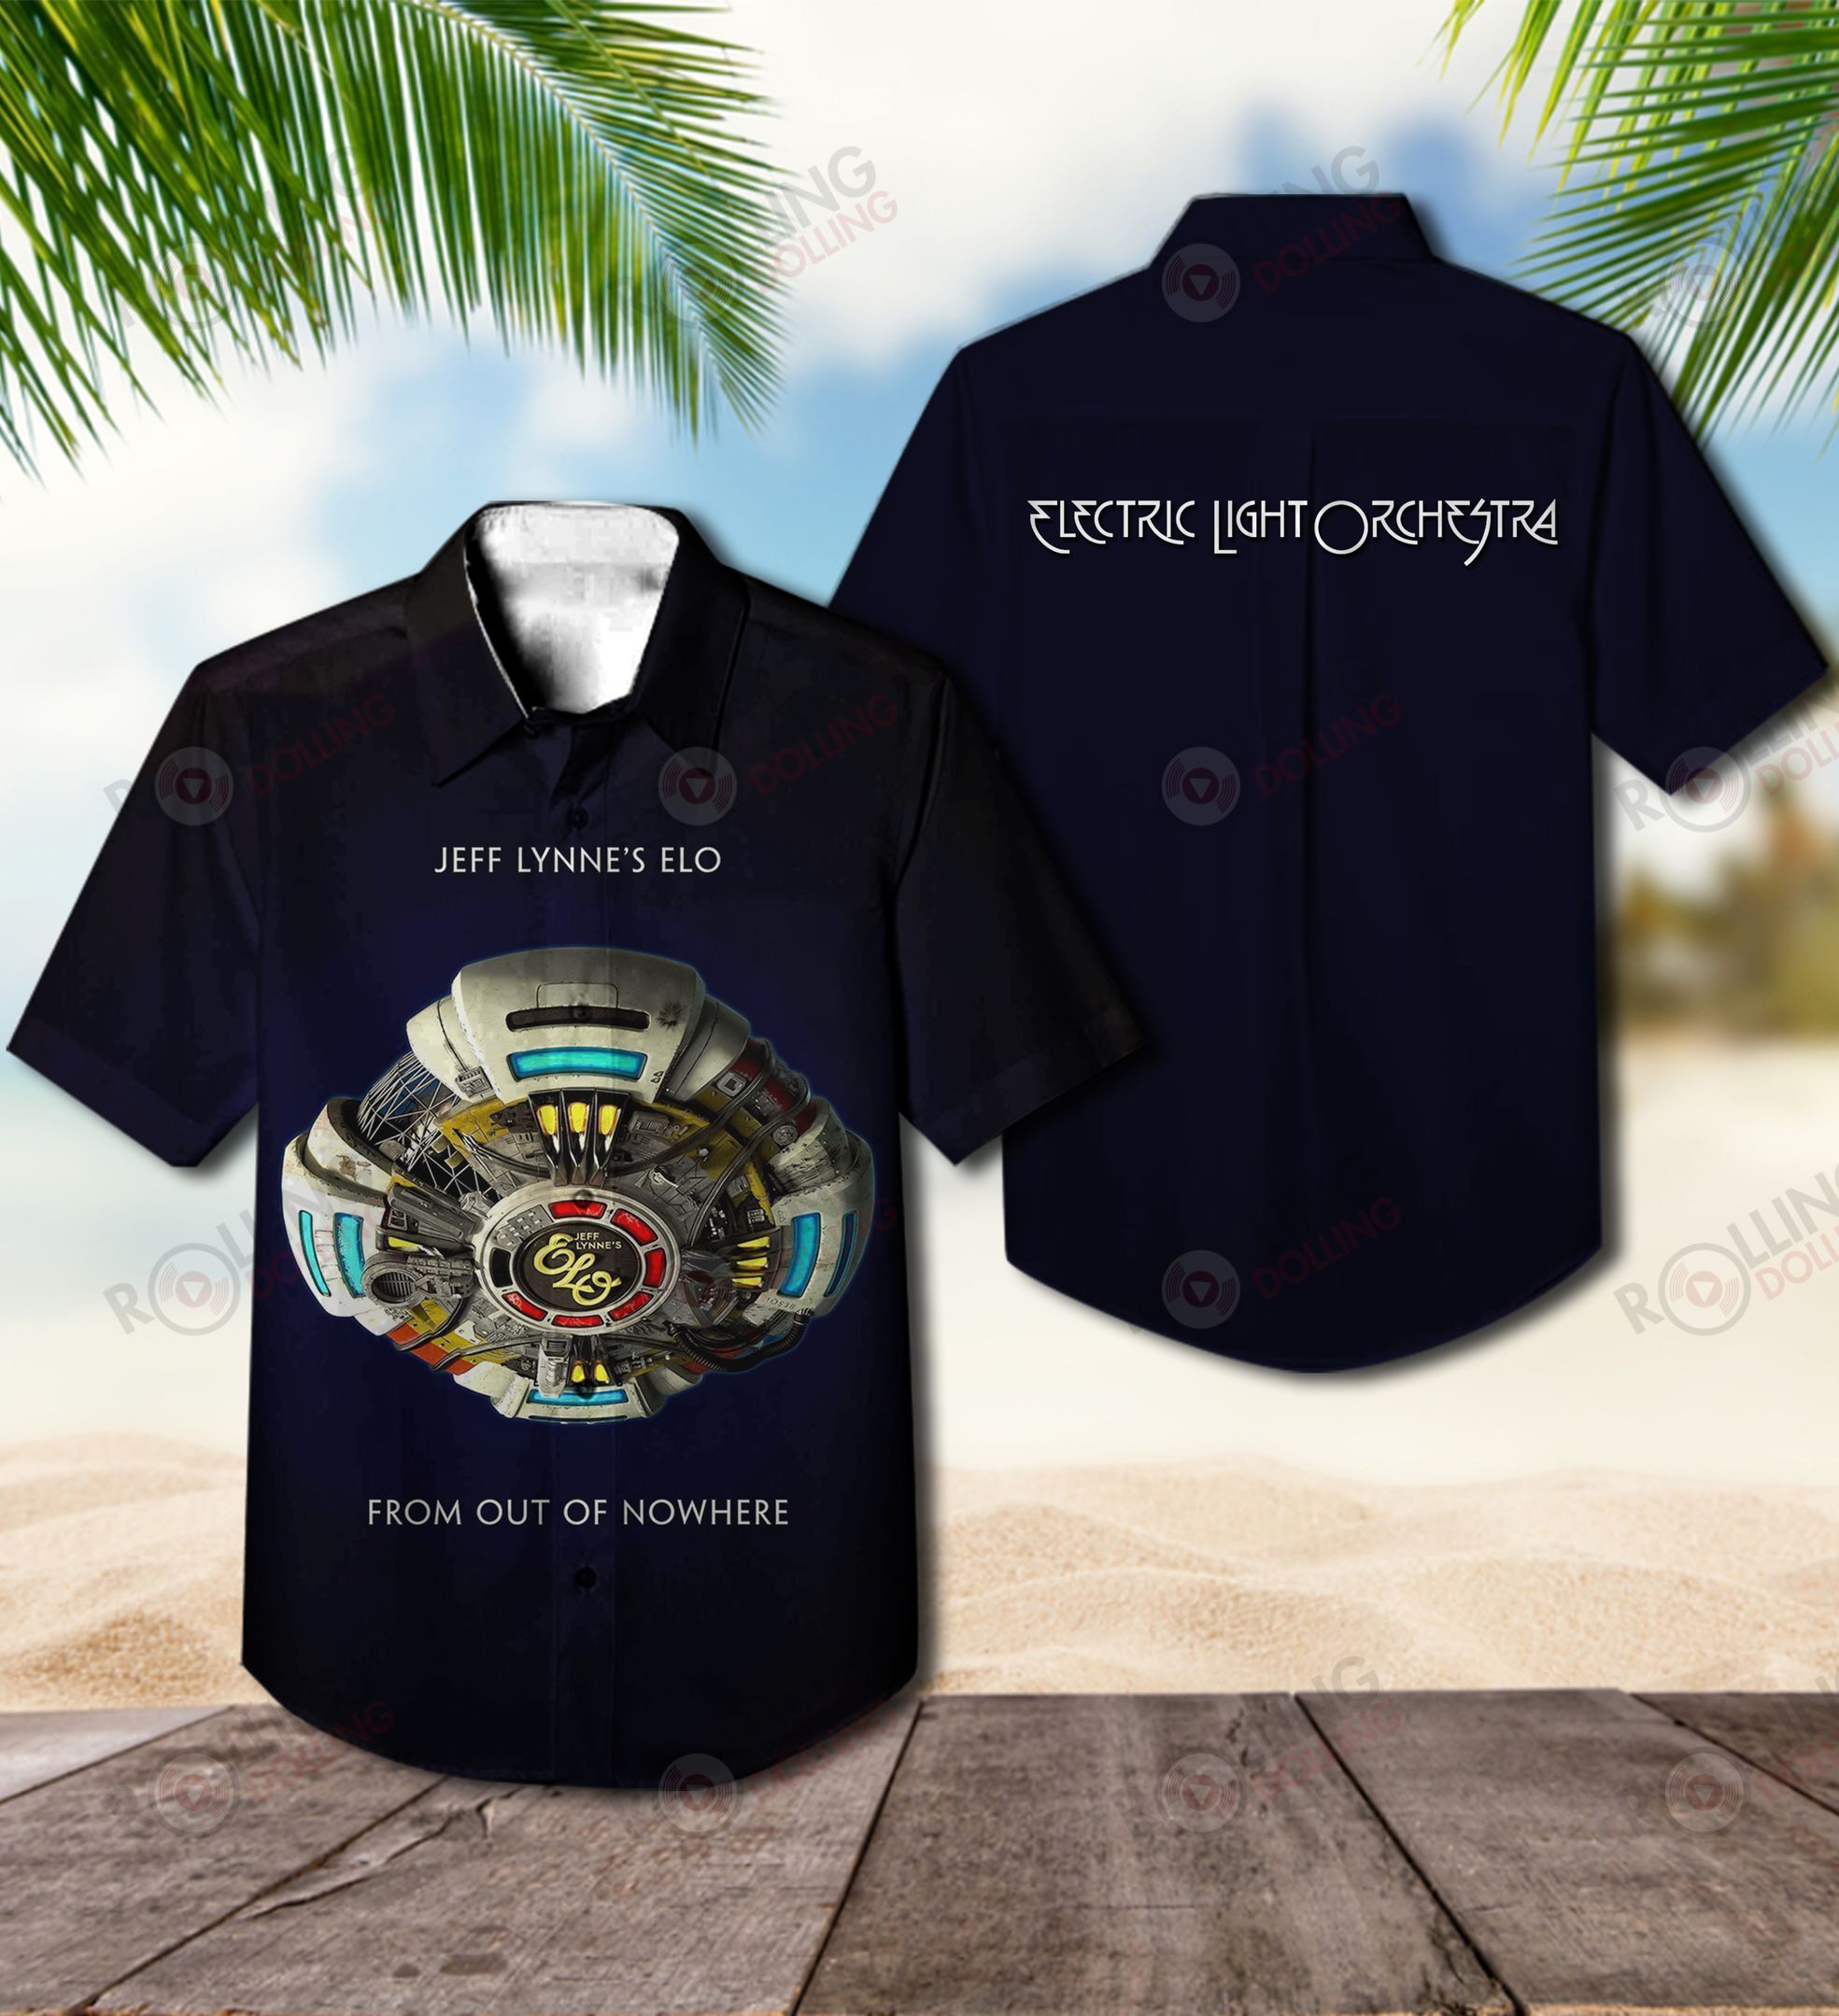 This would make a great gift for any fan who loves Hawaiian Shirt as well as Rock band 134